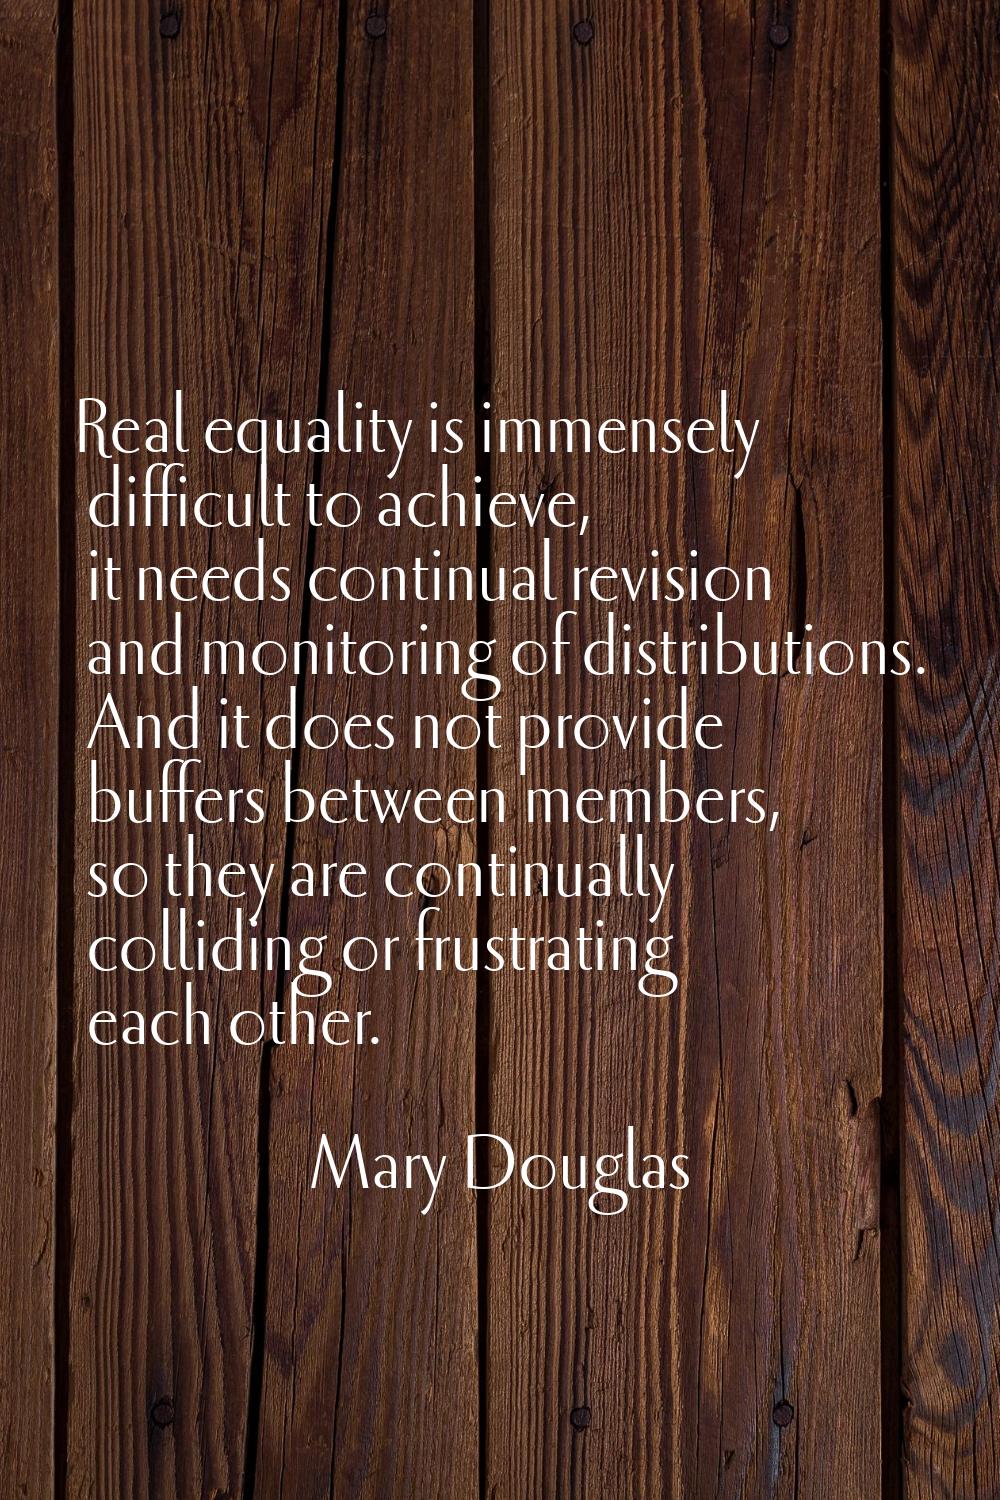 Real equality is immensely difficult to achieve, it needs continual revision and monitoring of dist